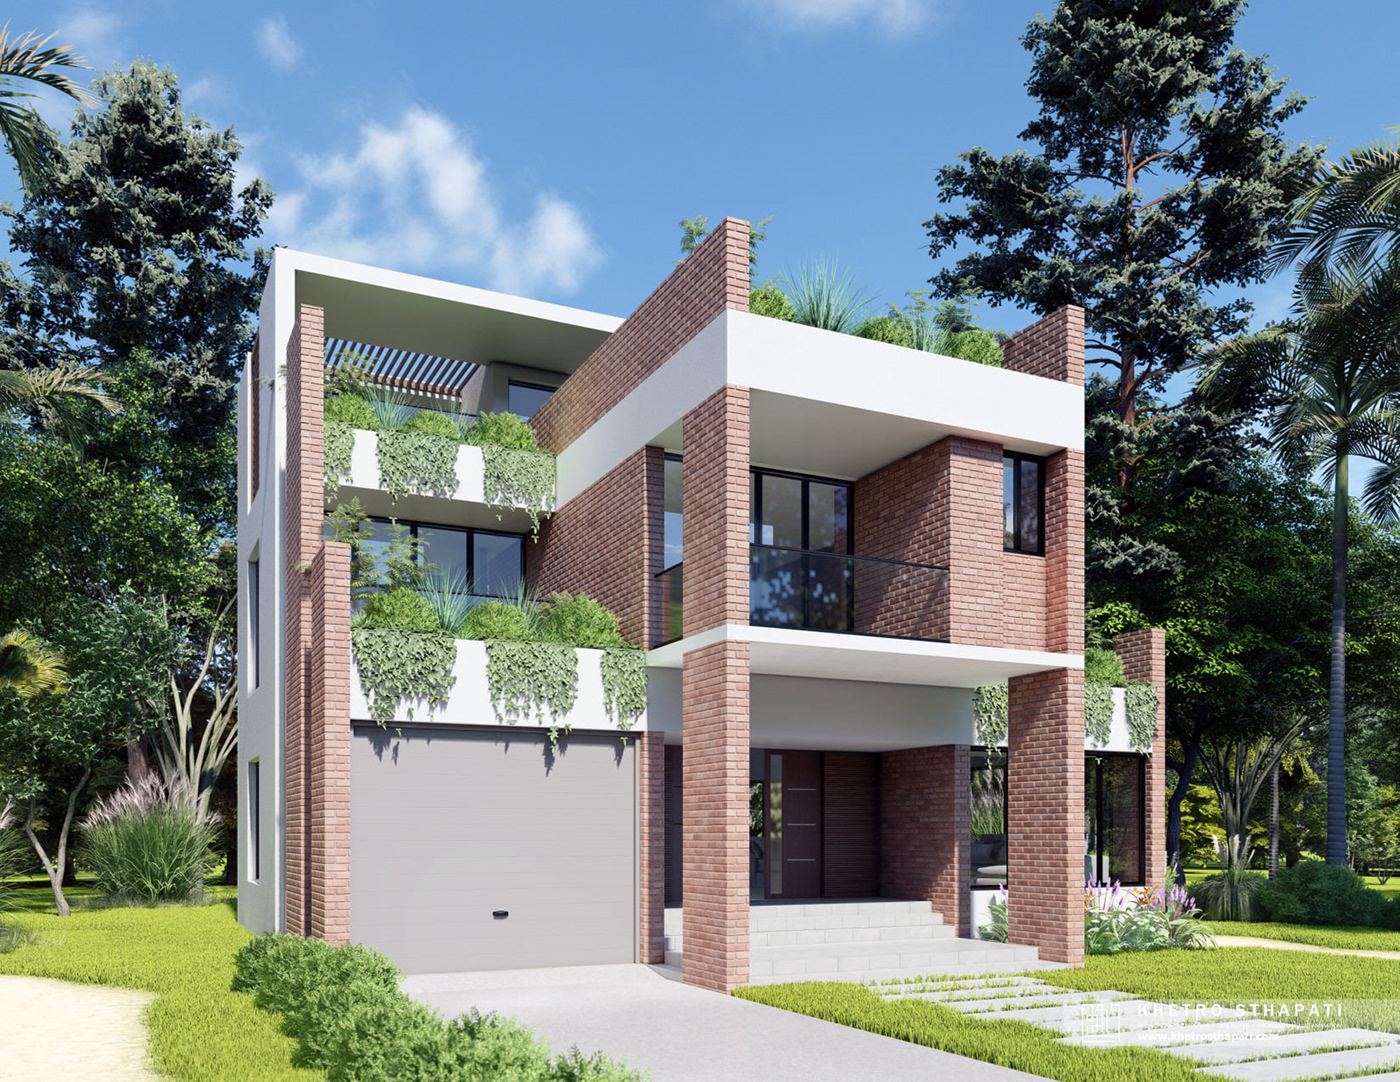 3ds max architecture exterior realestate Render Residential Design visualization